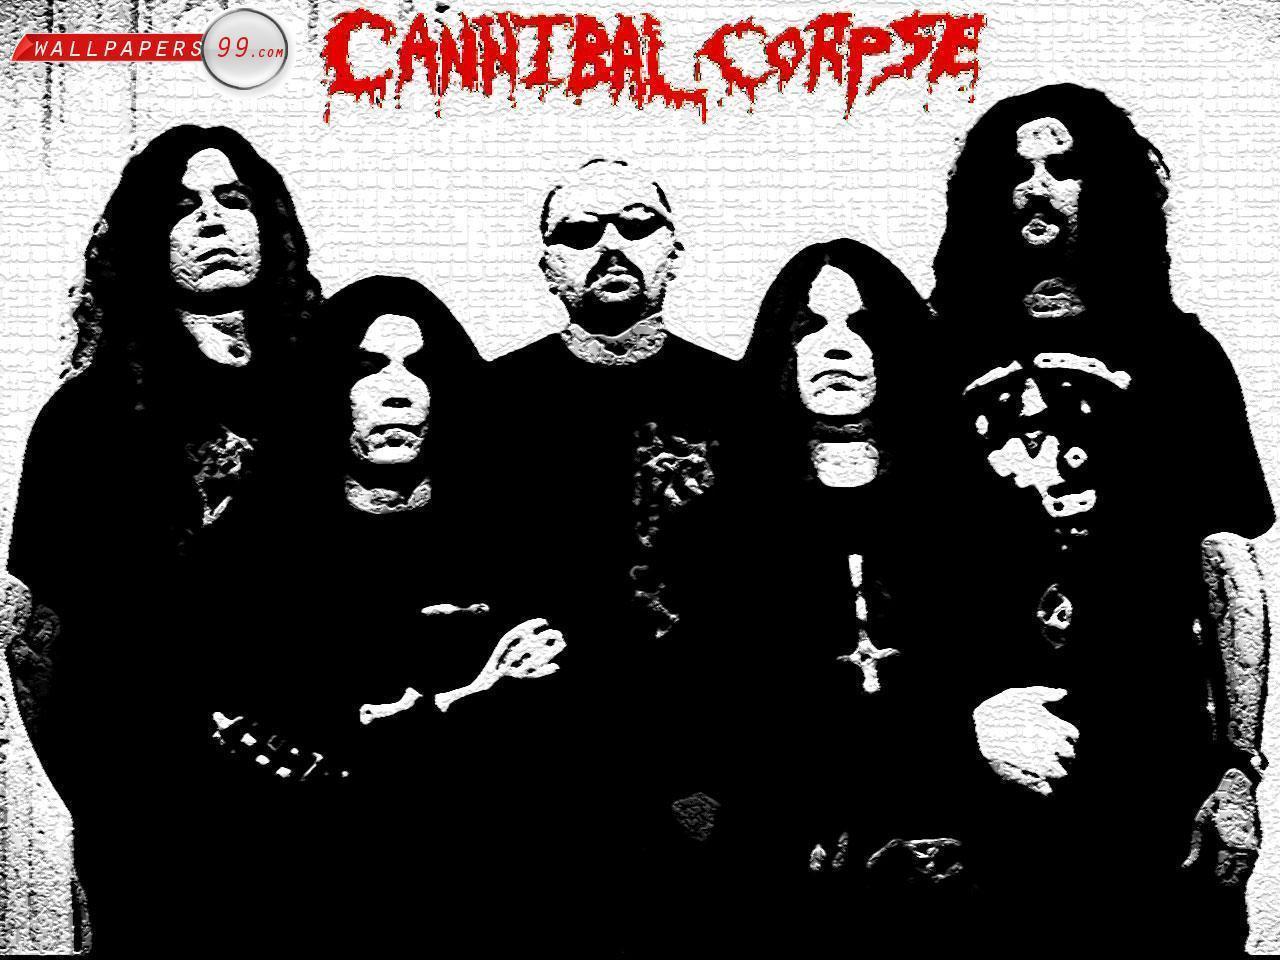 Cannibal Corpse Wallpaper Picture Image 1280x960 38259